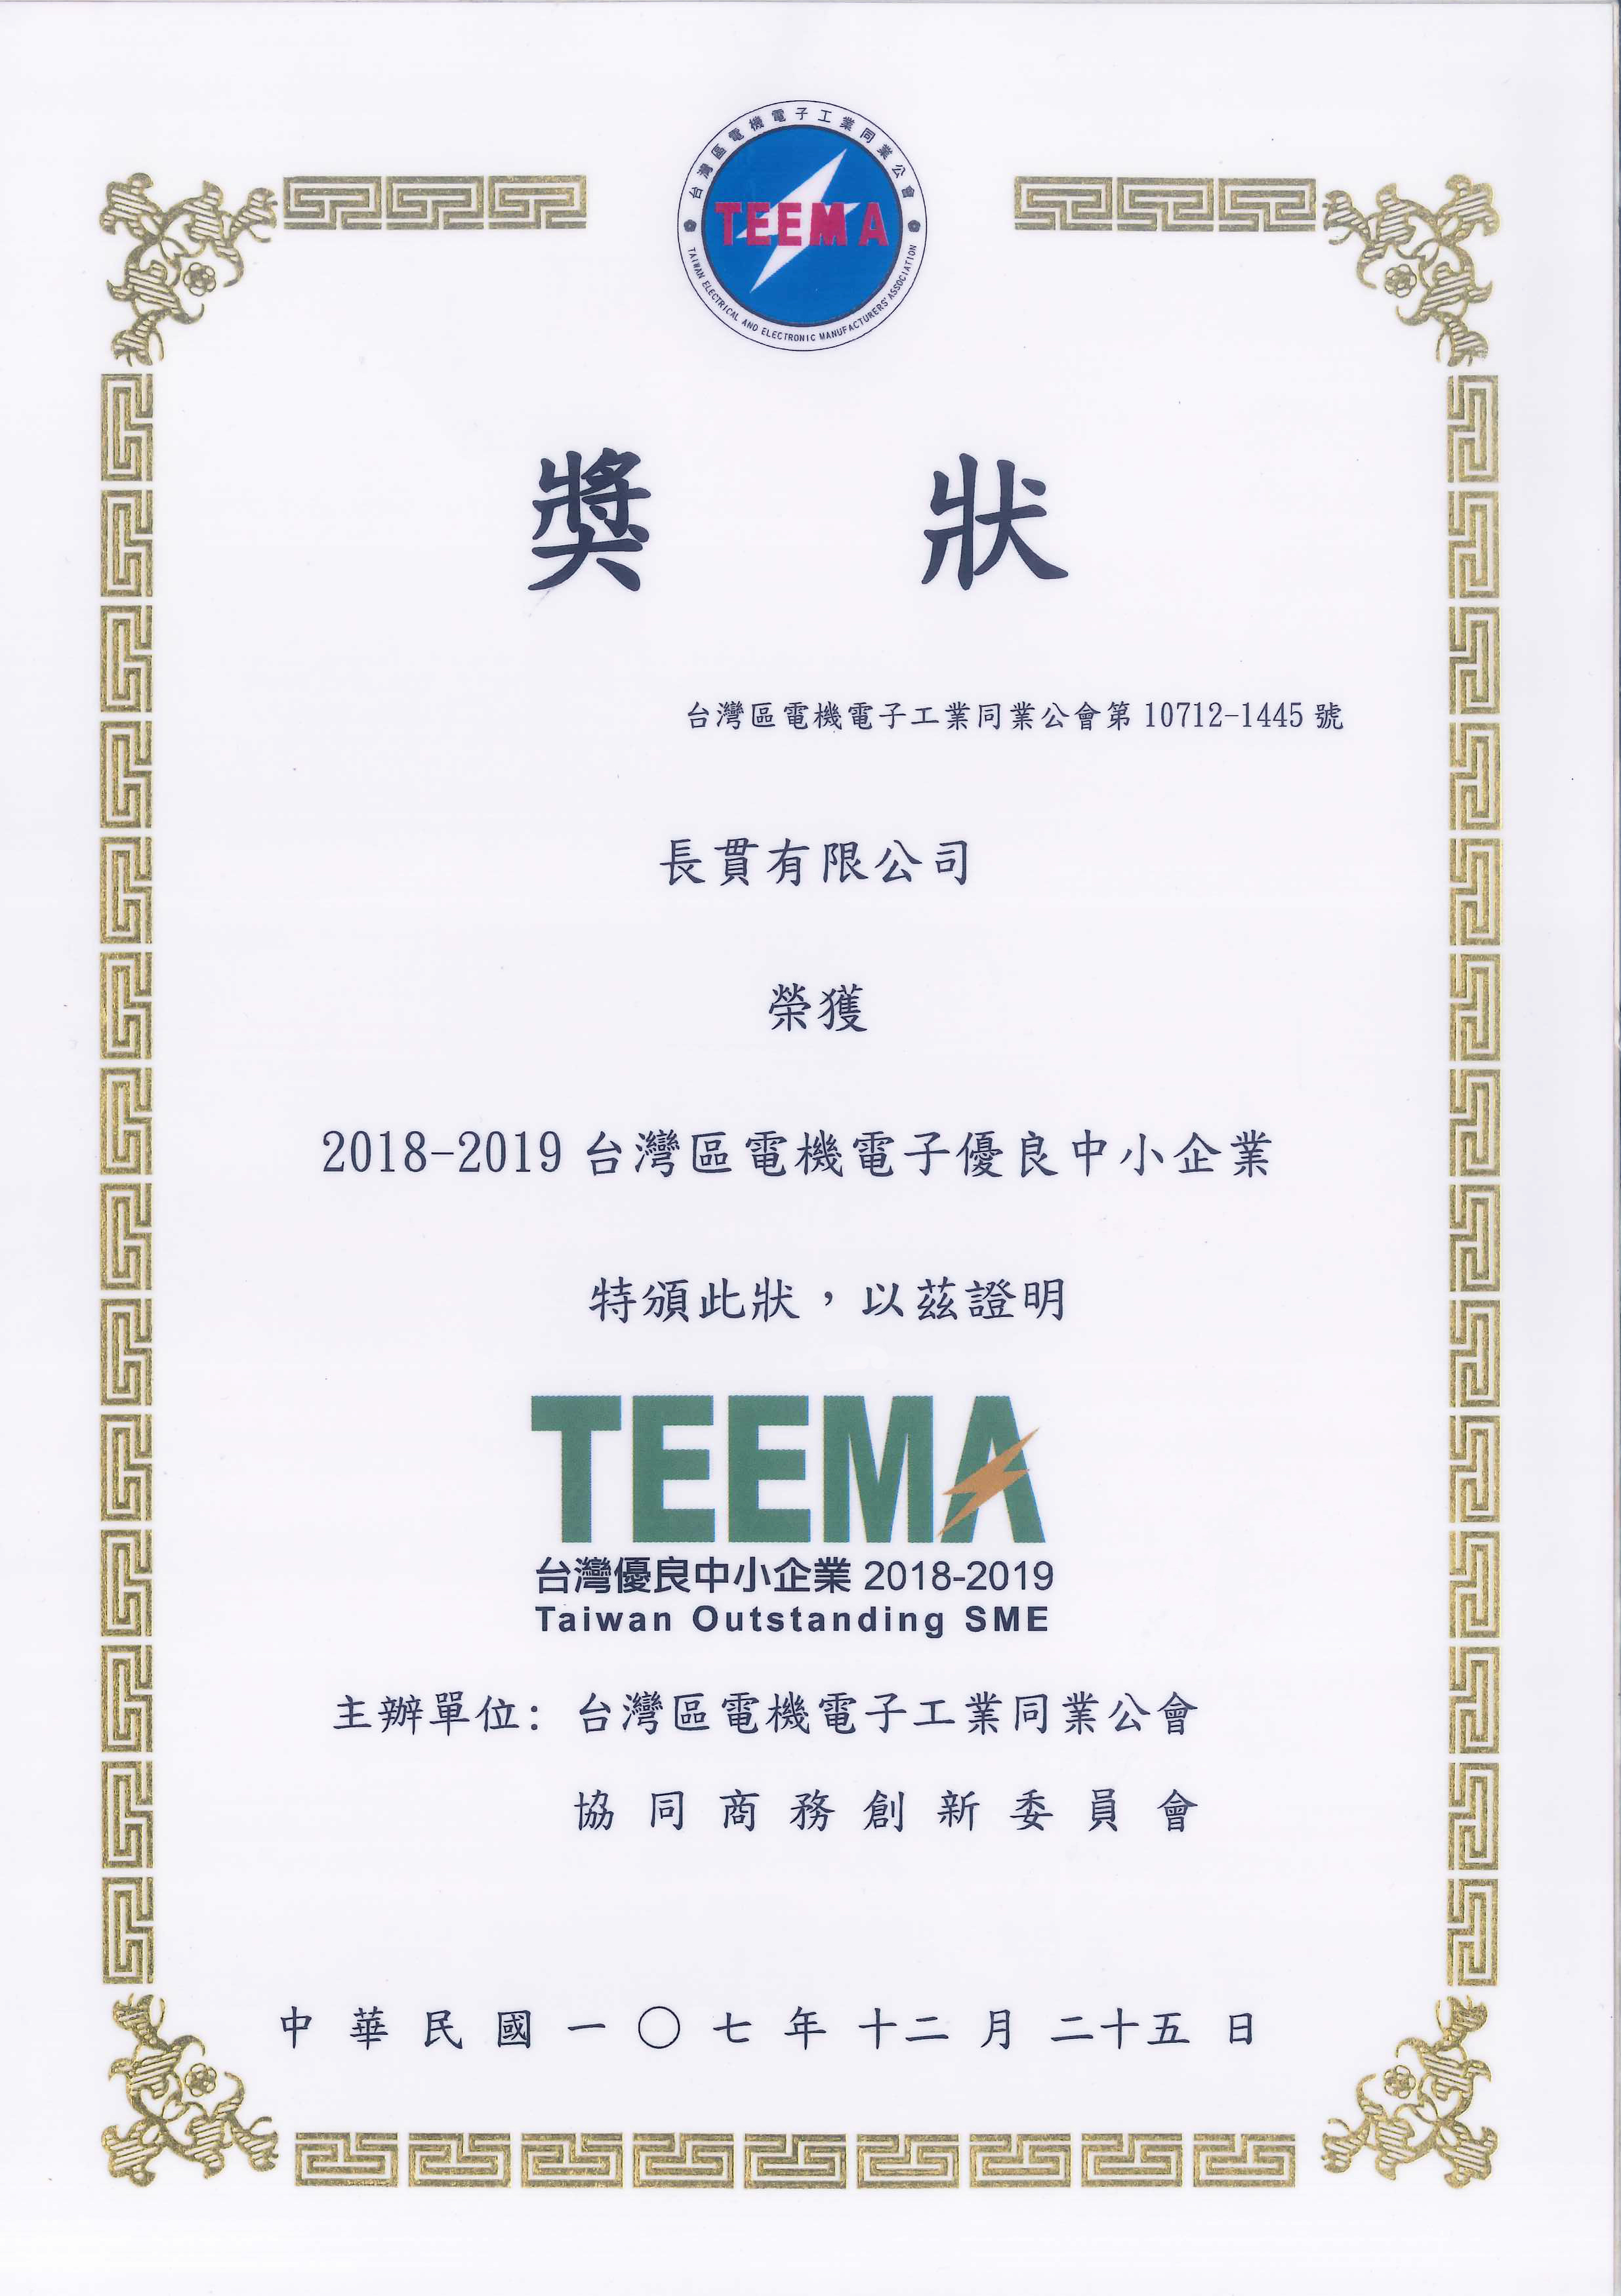 Taiwan Outstanding SME 2018-2019